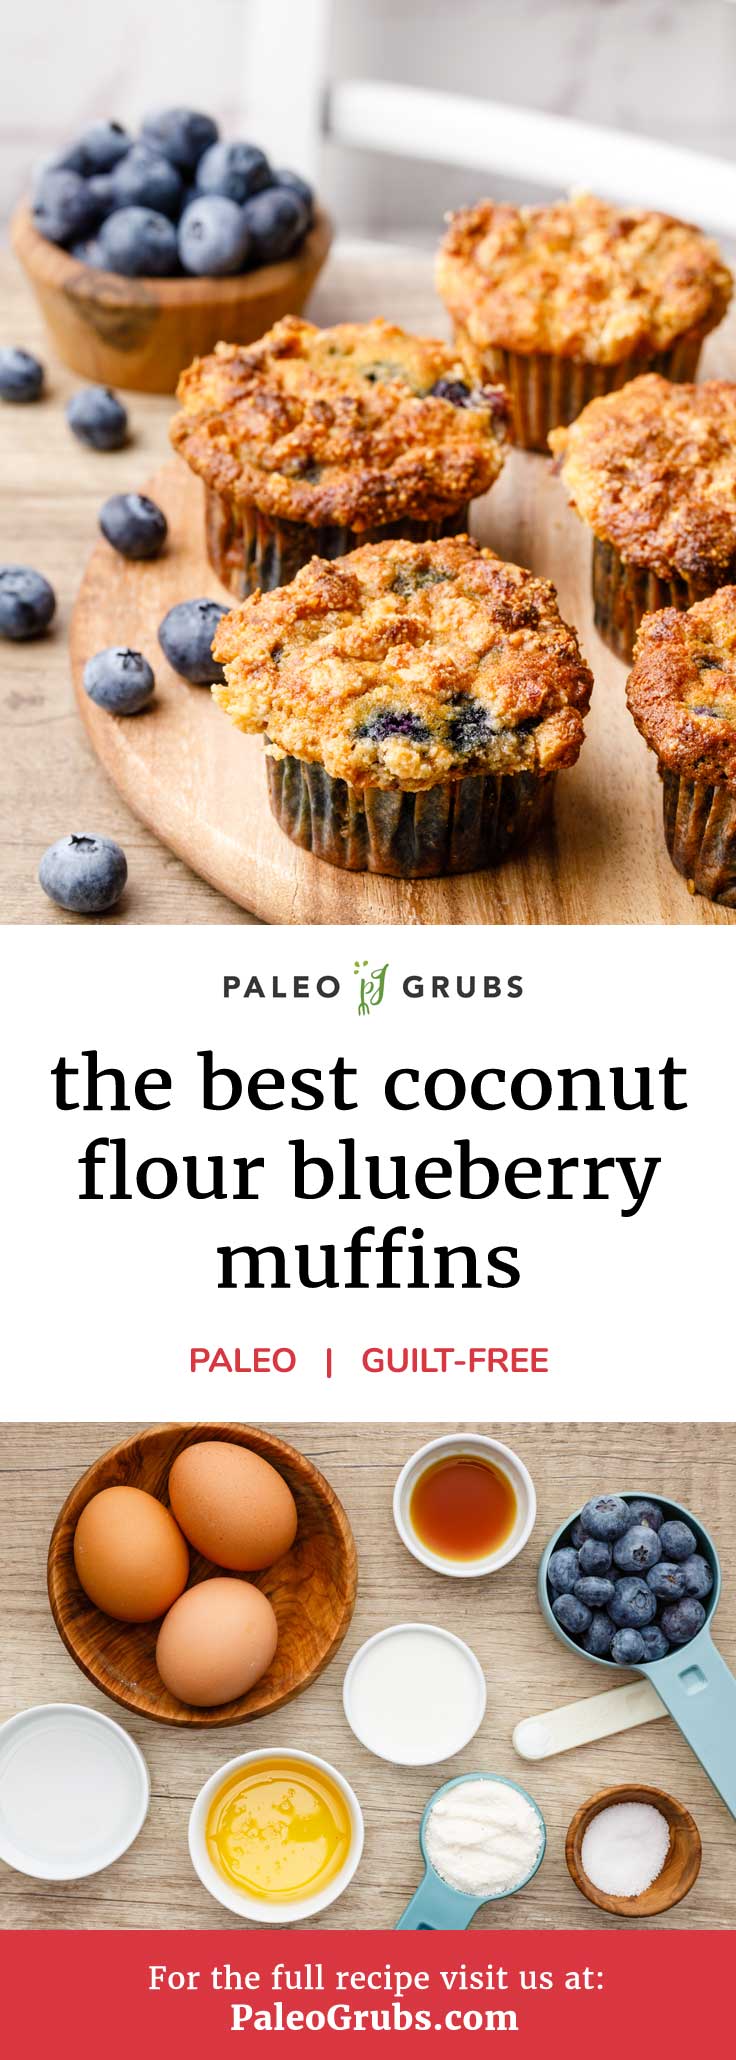 If you’re an individual who is always feeling rushed in the mornings and you’re looking for a breakfast option that’s both nutritious and easy to grab and go, this recipe for coconut flour blueberry muffins is for you.

The muffins are 100% grain and gluten free, featuring fresh blueberries and a delicious crumble top made with honey and nuts. It’s definitely possible to enjoy a tasty muffin without feeling any guilt with this recipe.